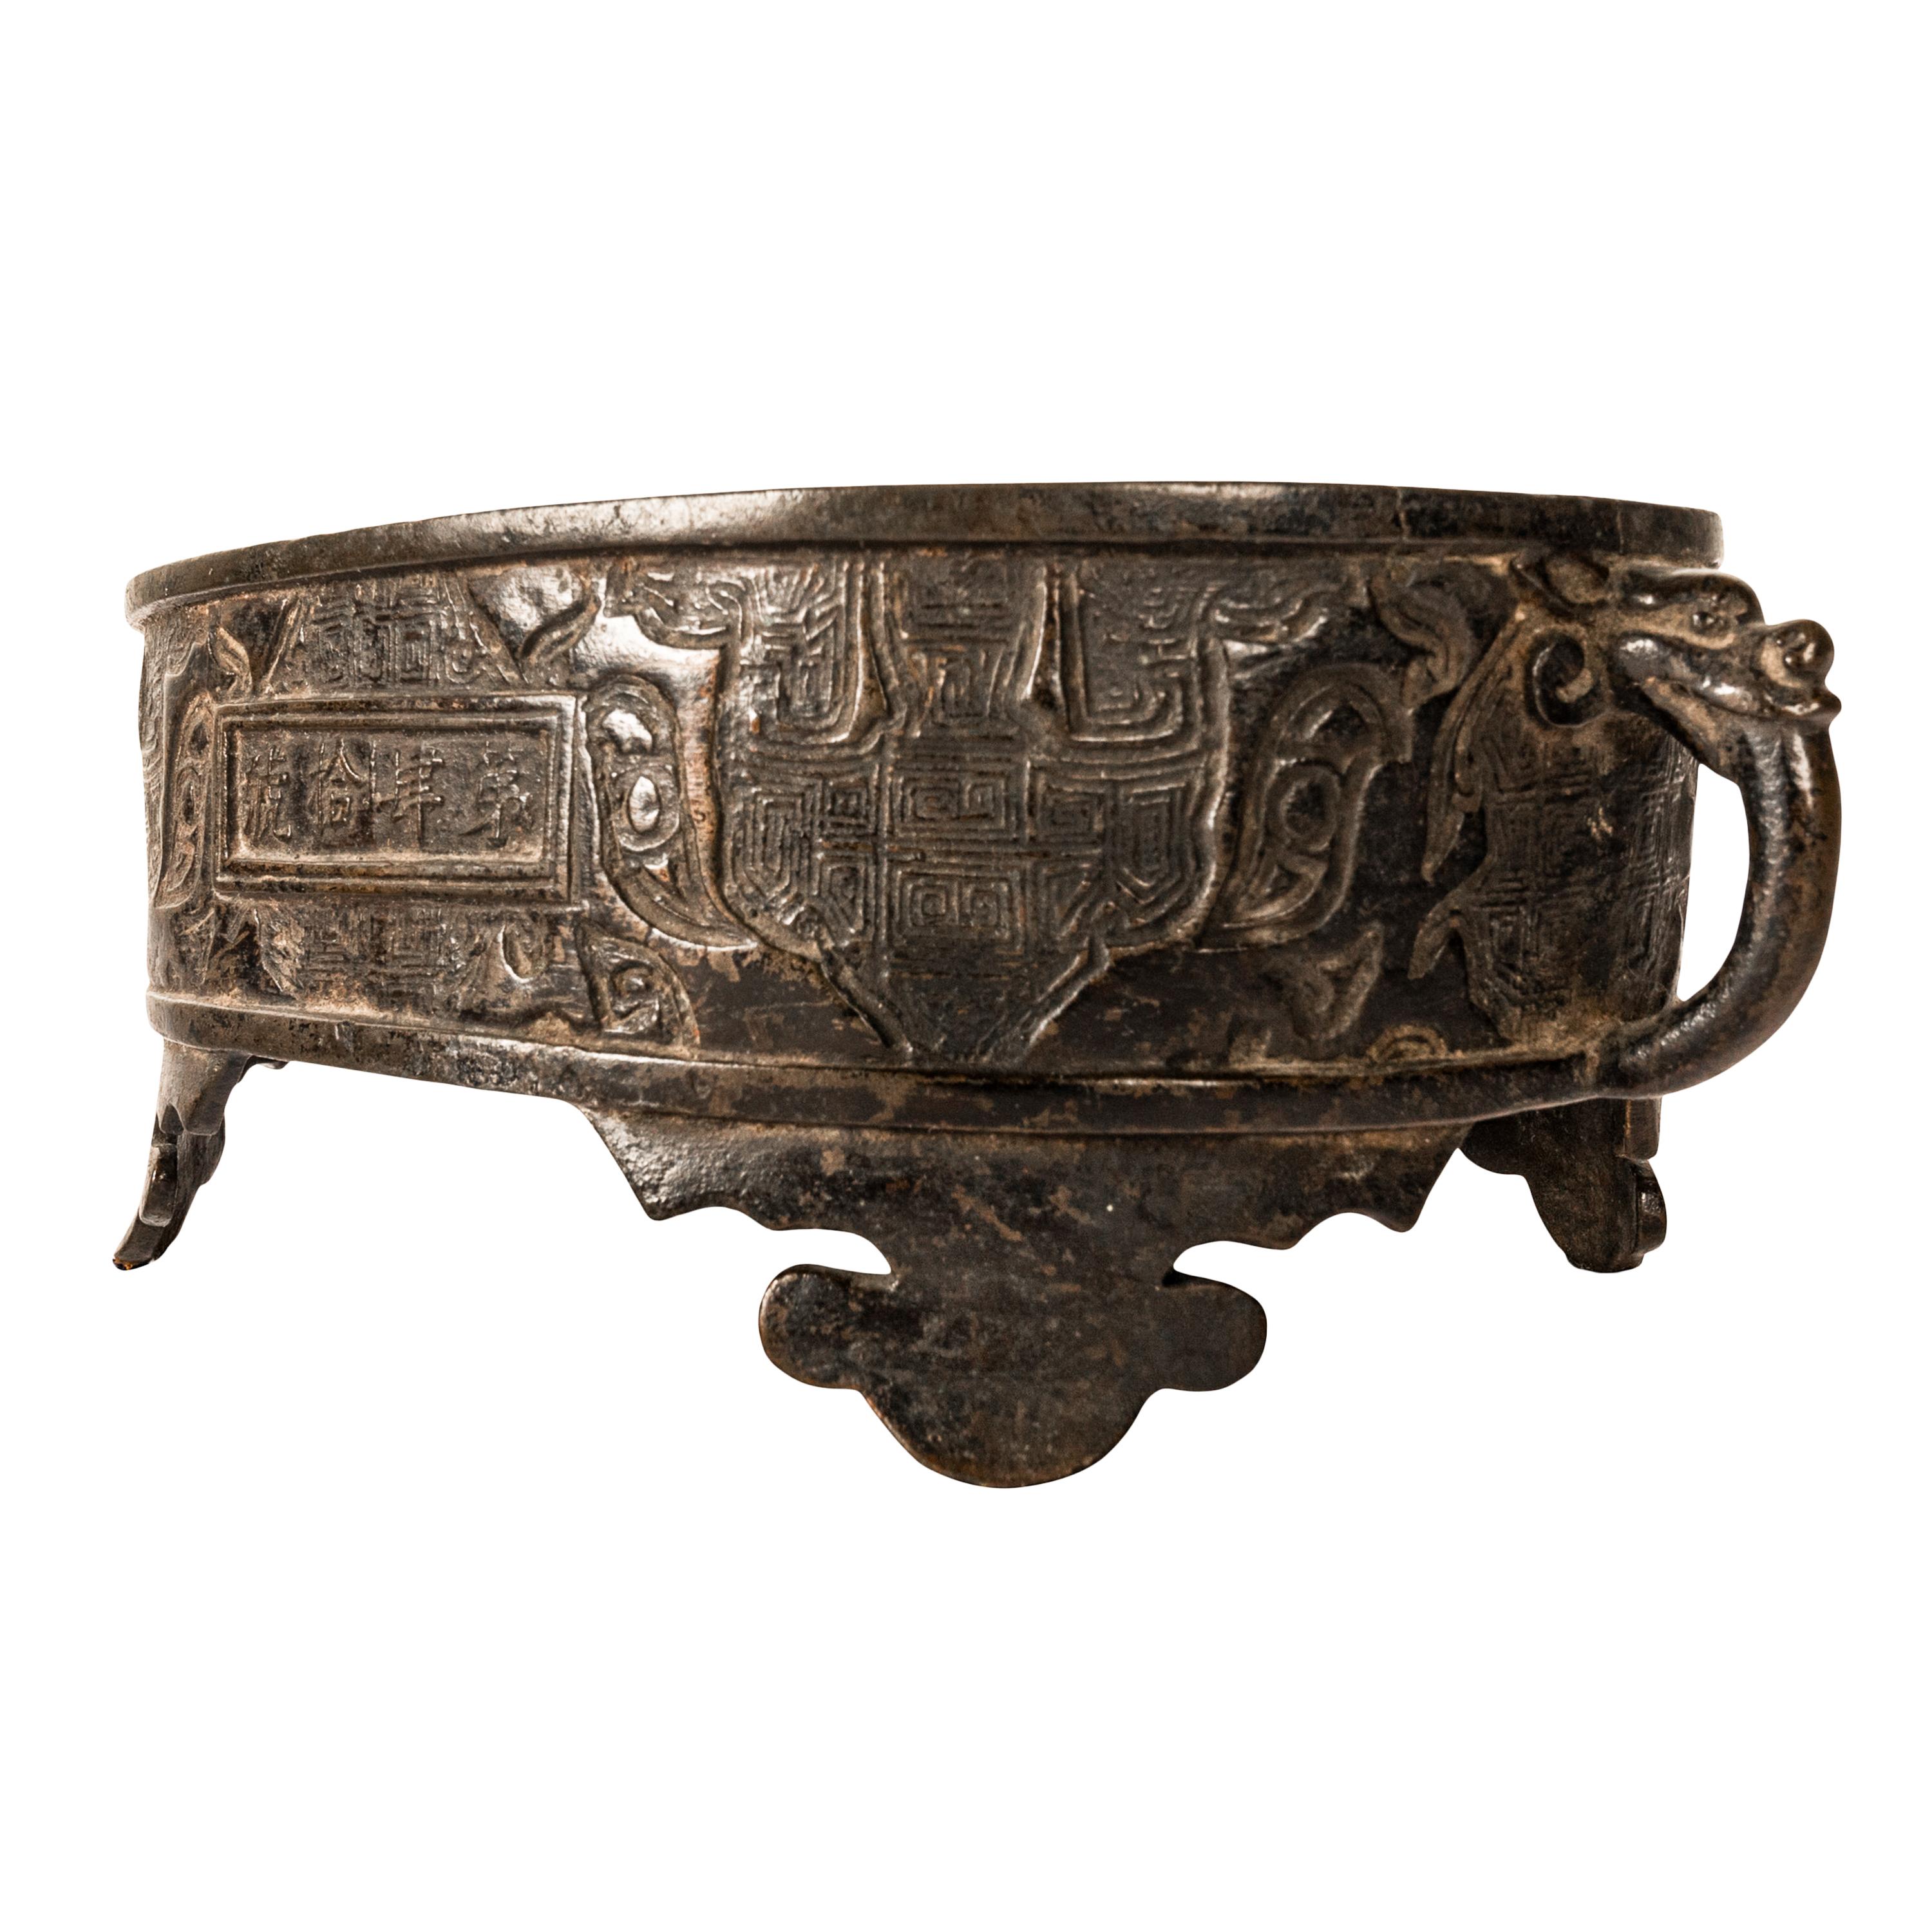 A good antique Chinese Zhou dynasty style archaistic bronze censer, incense burner.
This cast bronze censer is in the archaic Zhou dynasty style, but believed to be more likely from the Ming dynasty. The shallow oval shaped censer with zoomorphic